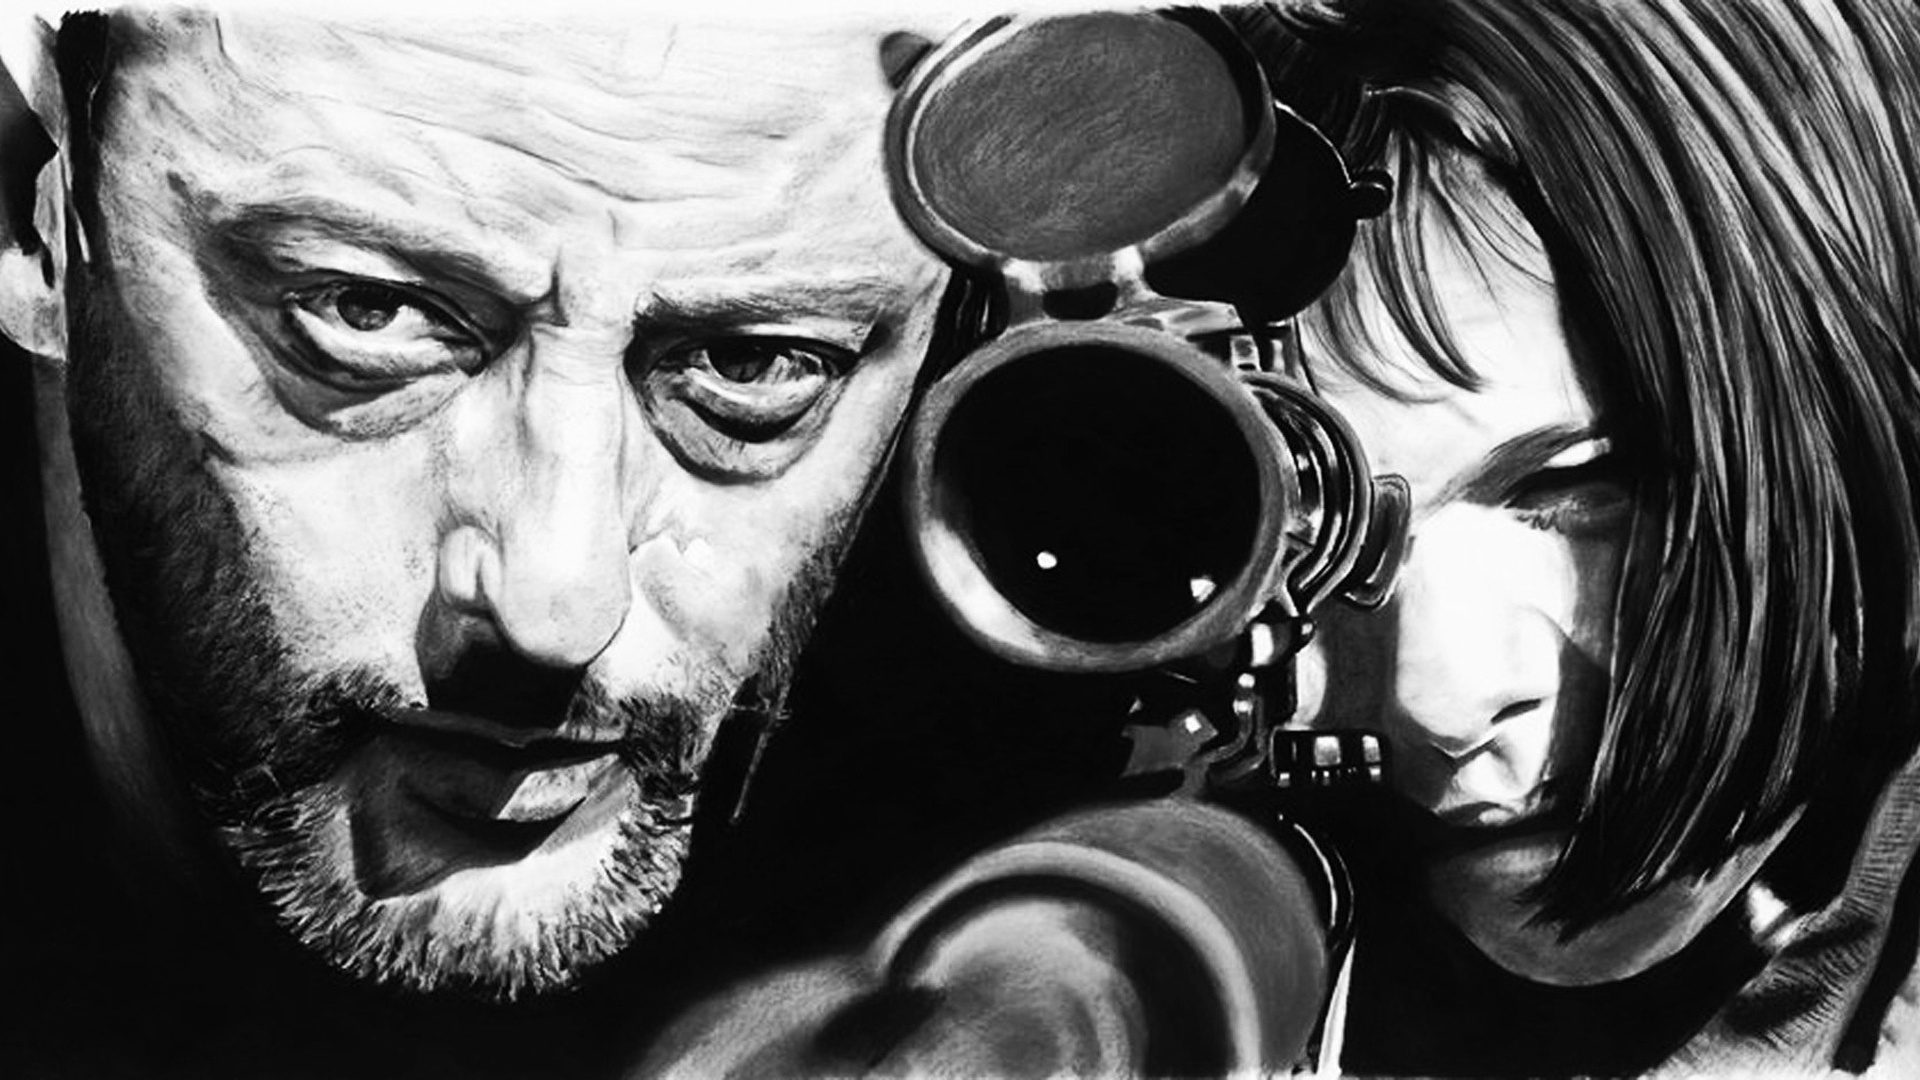 High Resolution Wallpaper | Leon: The Professional 1920x1080 px